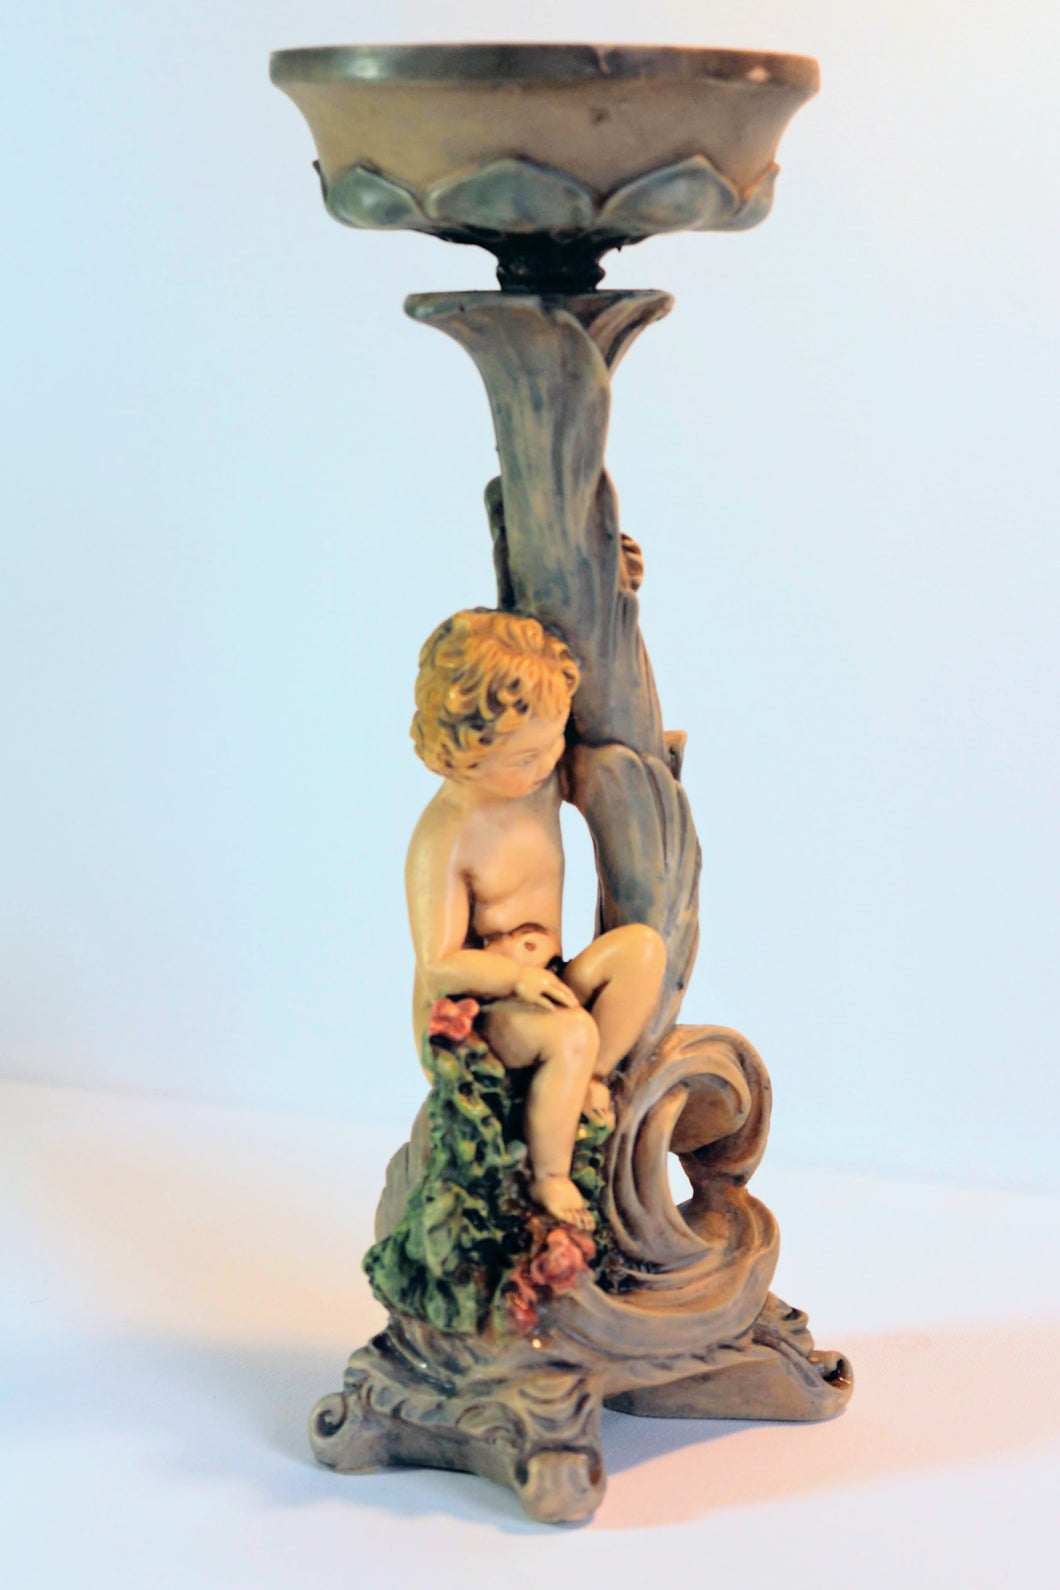 Sold Vintage Cherub Candle Holder, Hand Painted Resin Cherub Candle Holder